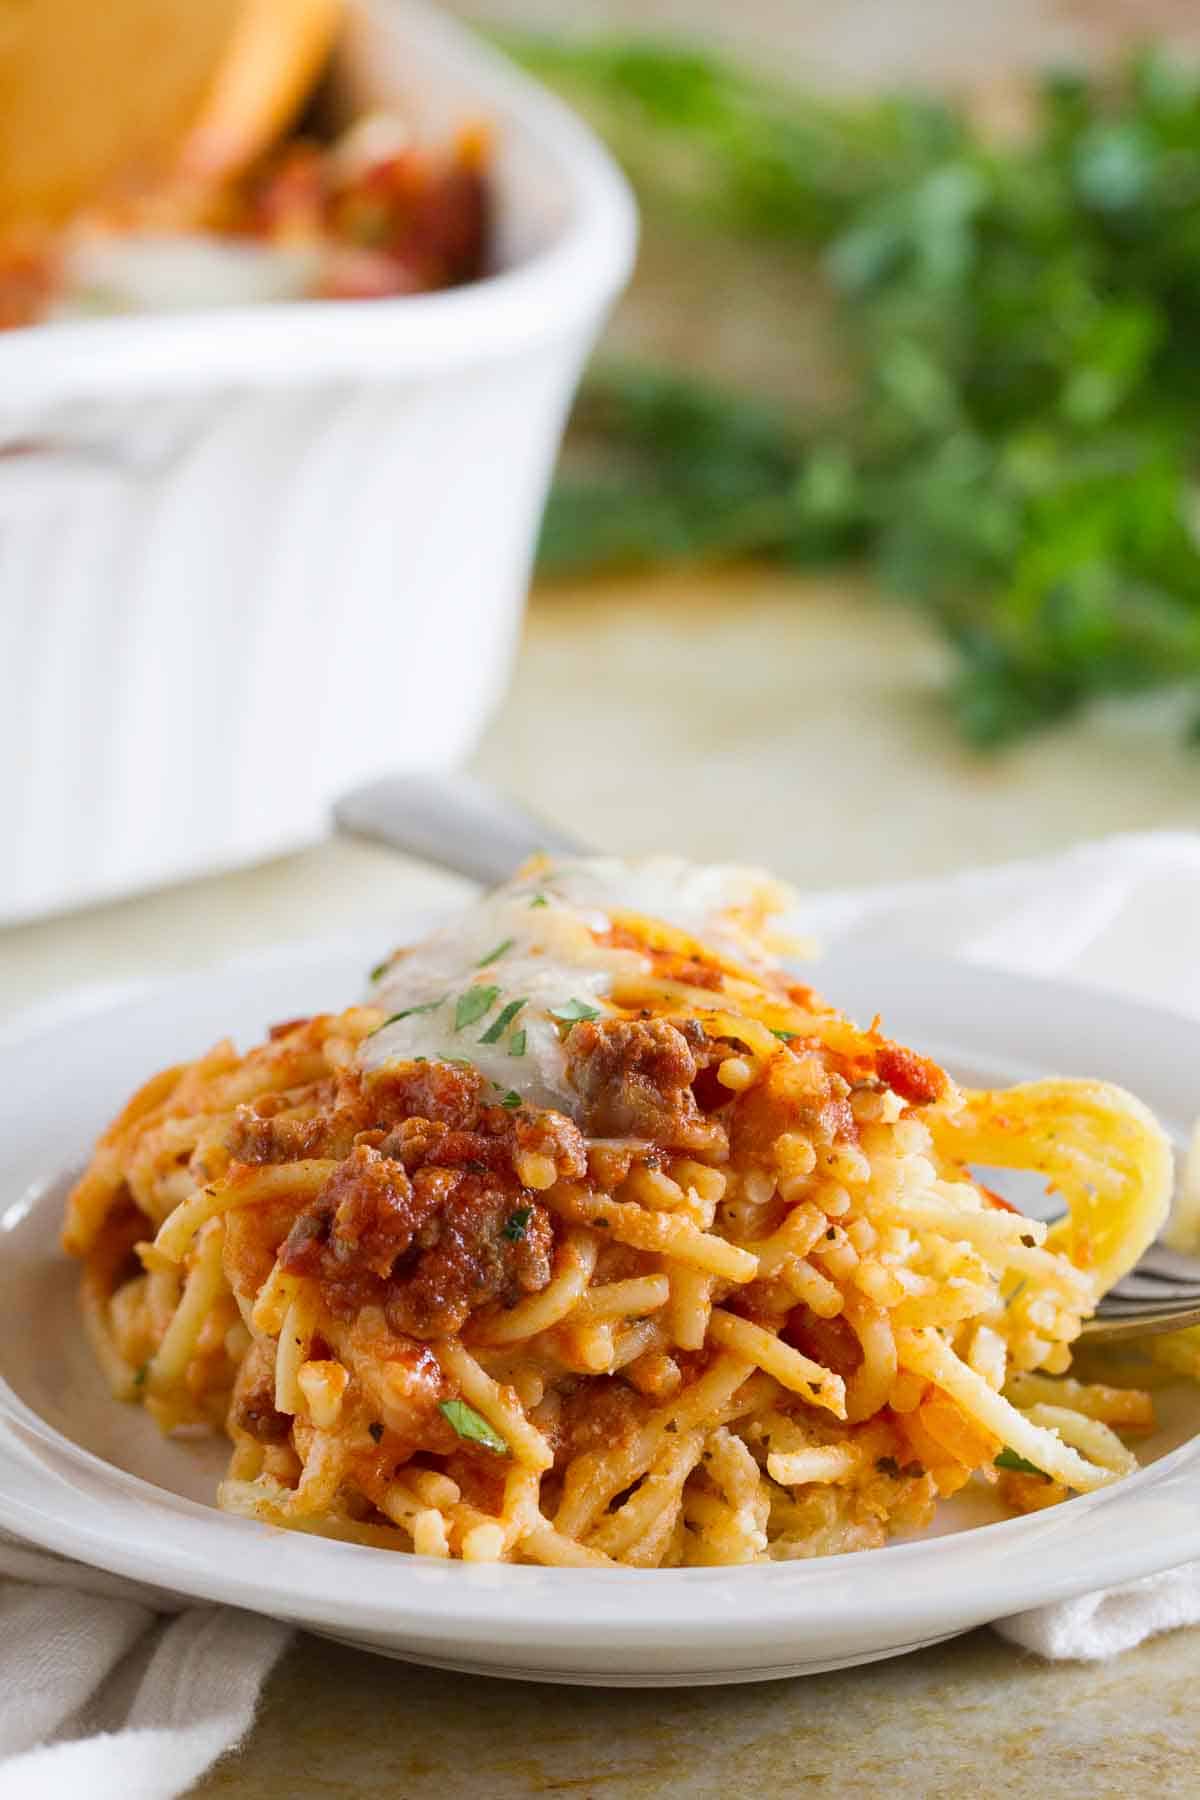 Serving of Spaghetti Lasagna on a plate.